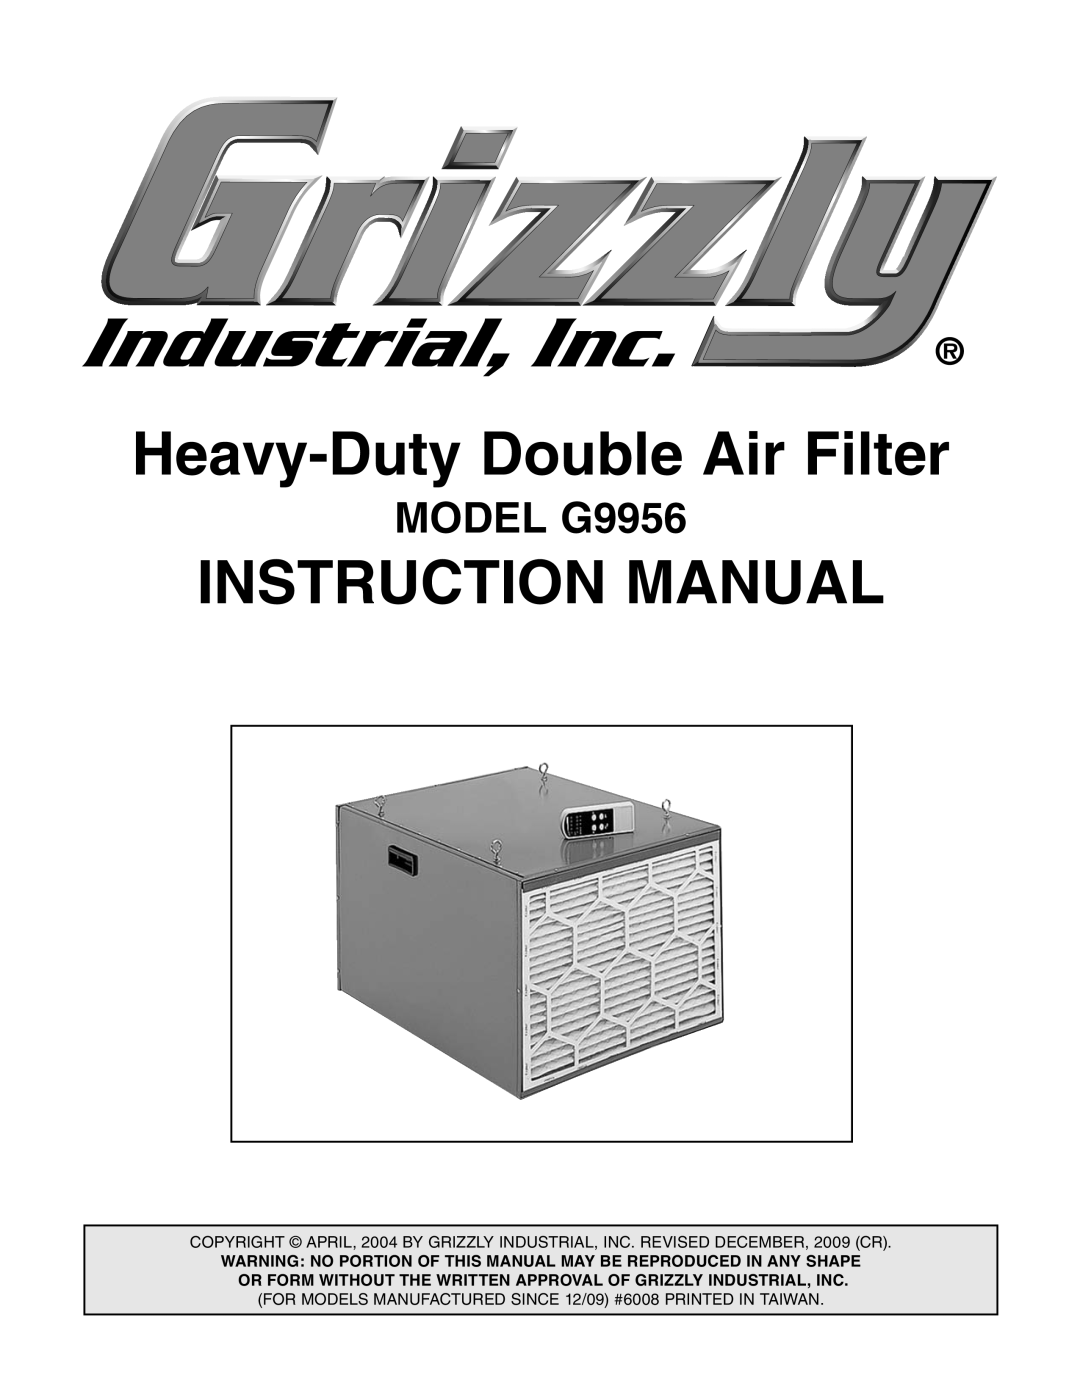 Grizzly instruction manual MODEL G9956, Heavy-DutyDouble Air Filter 